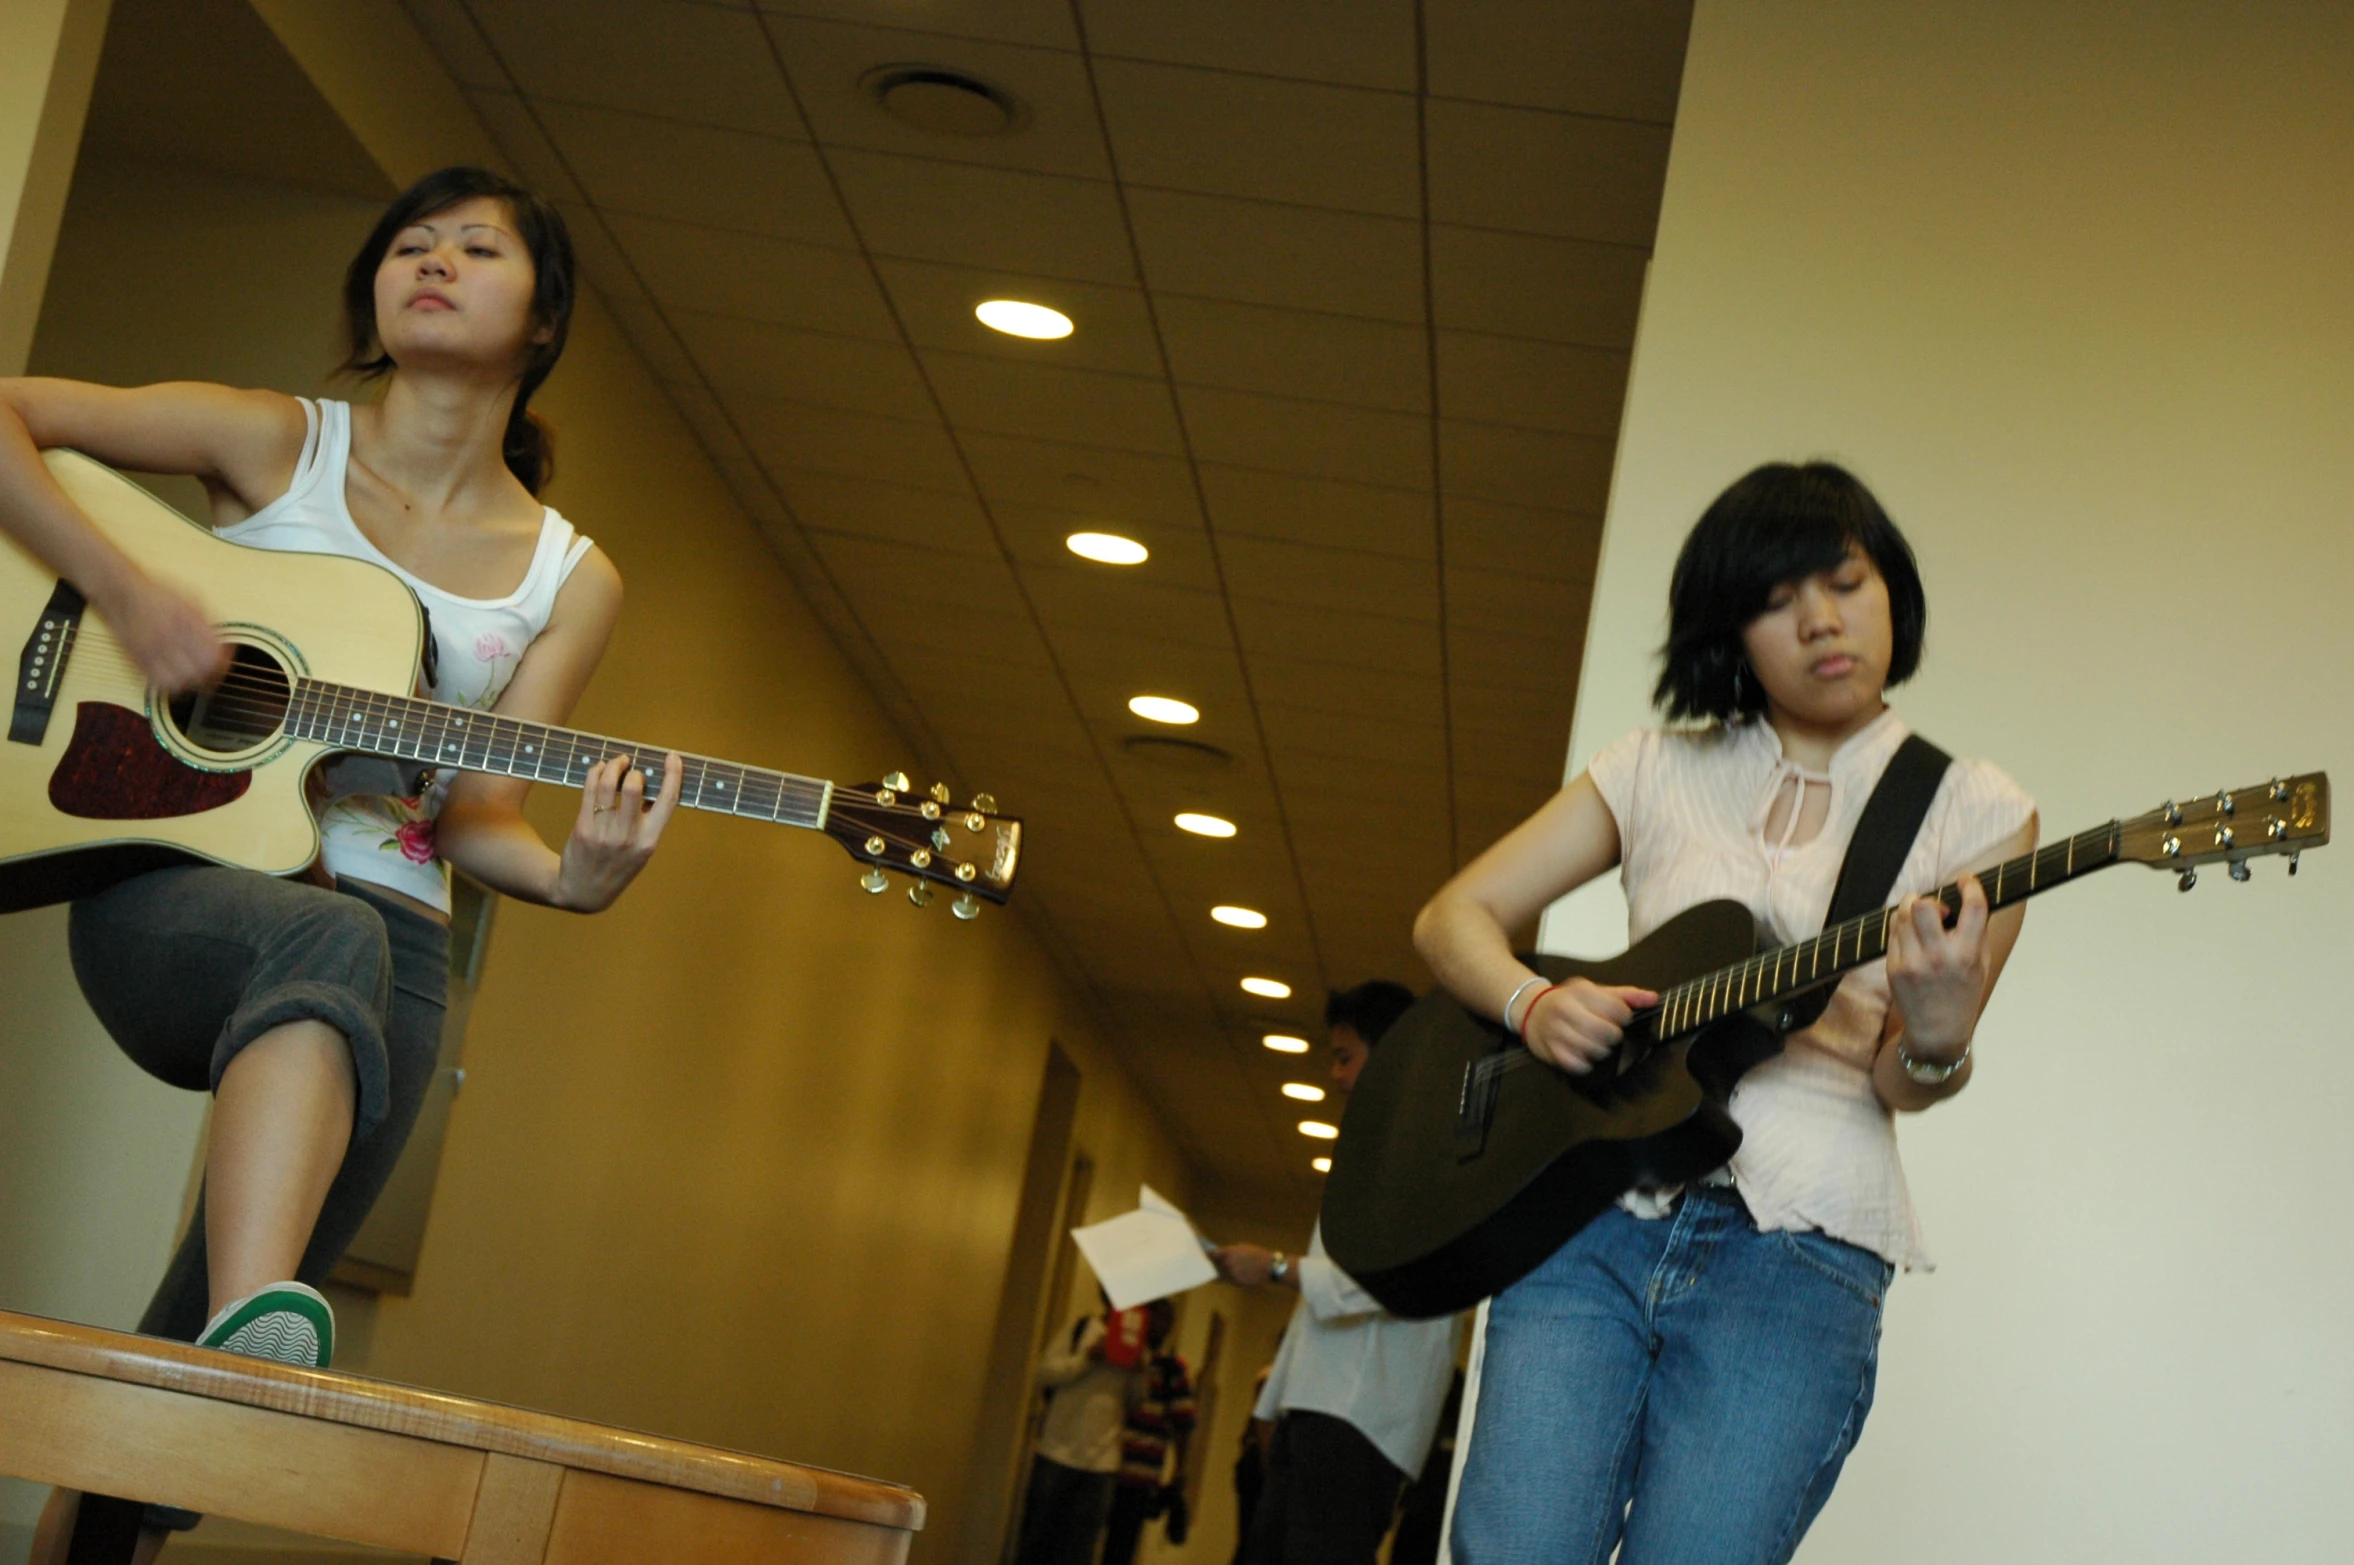 two girls playing guitars in a hallway together